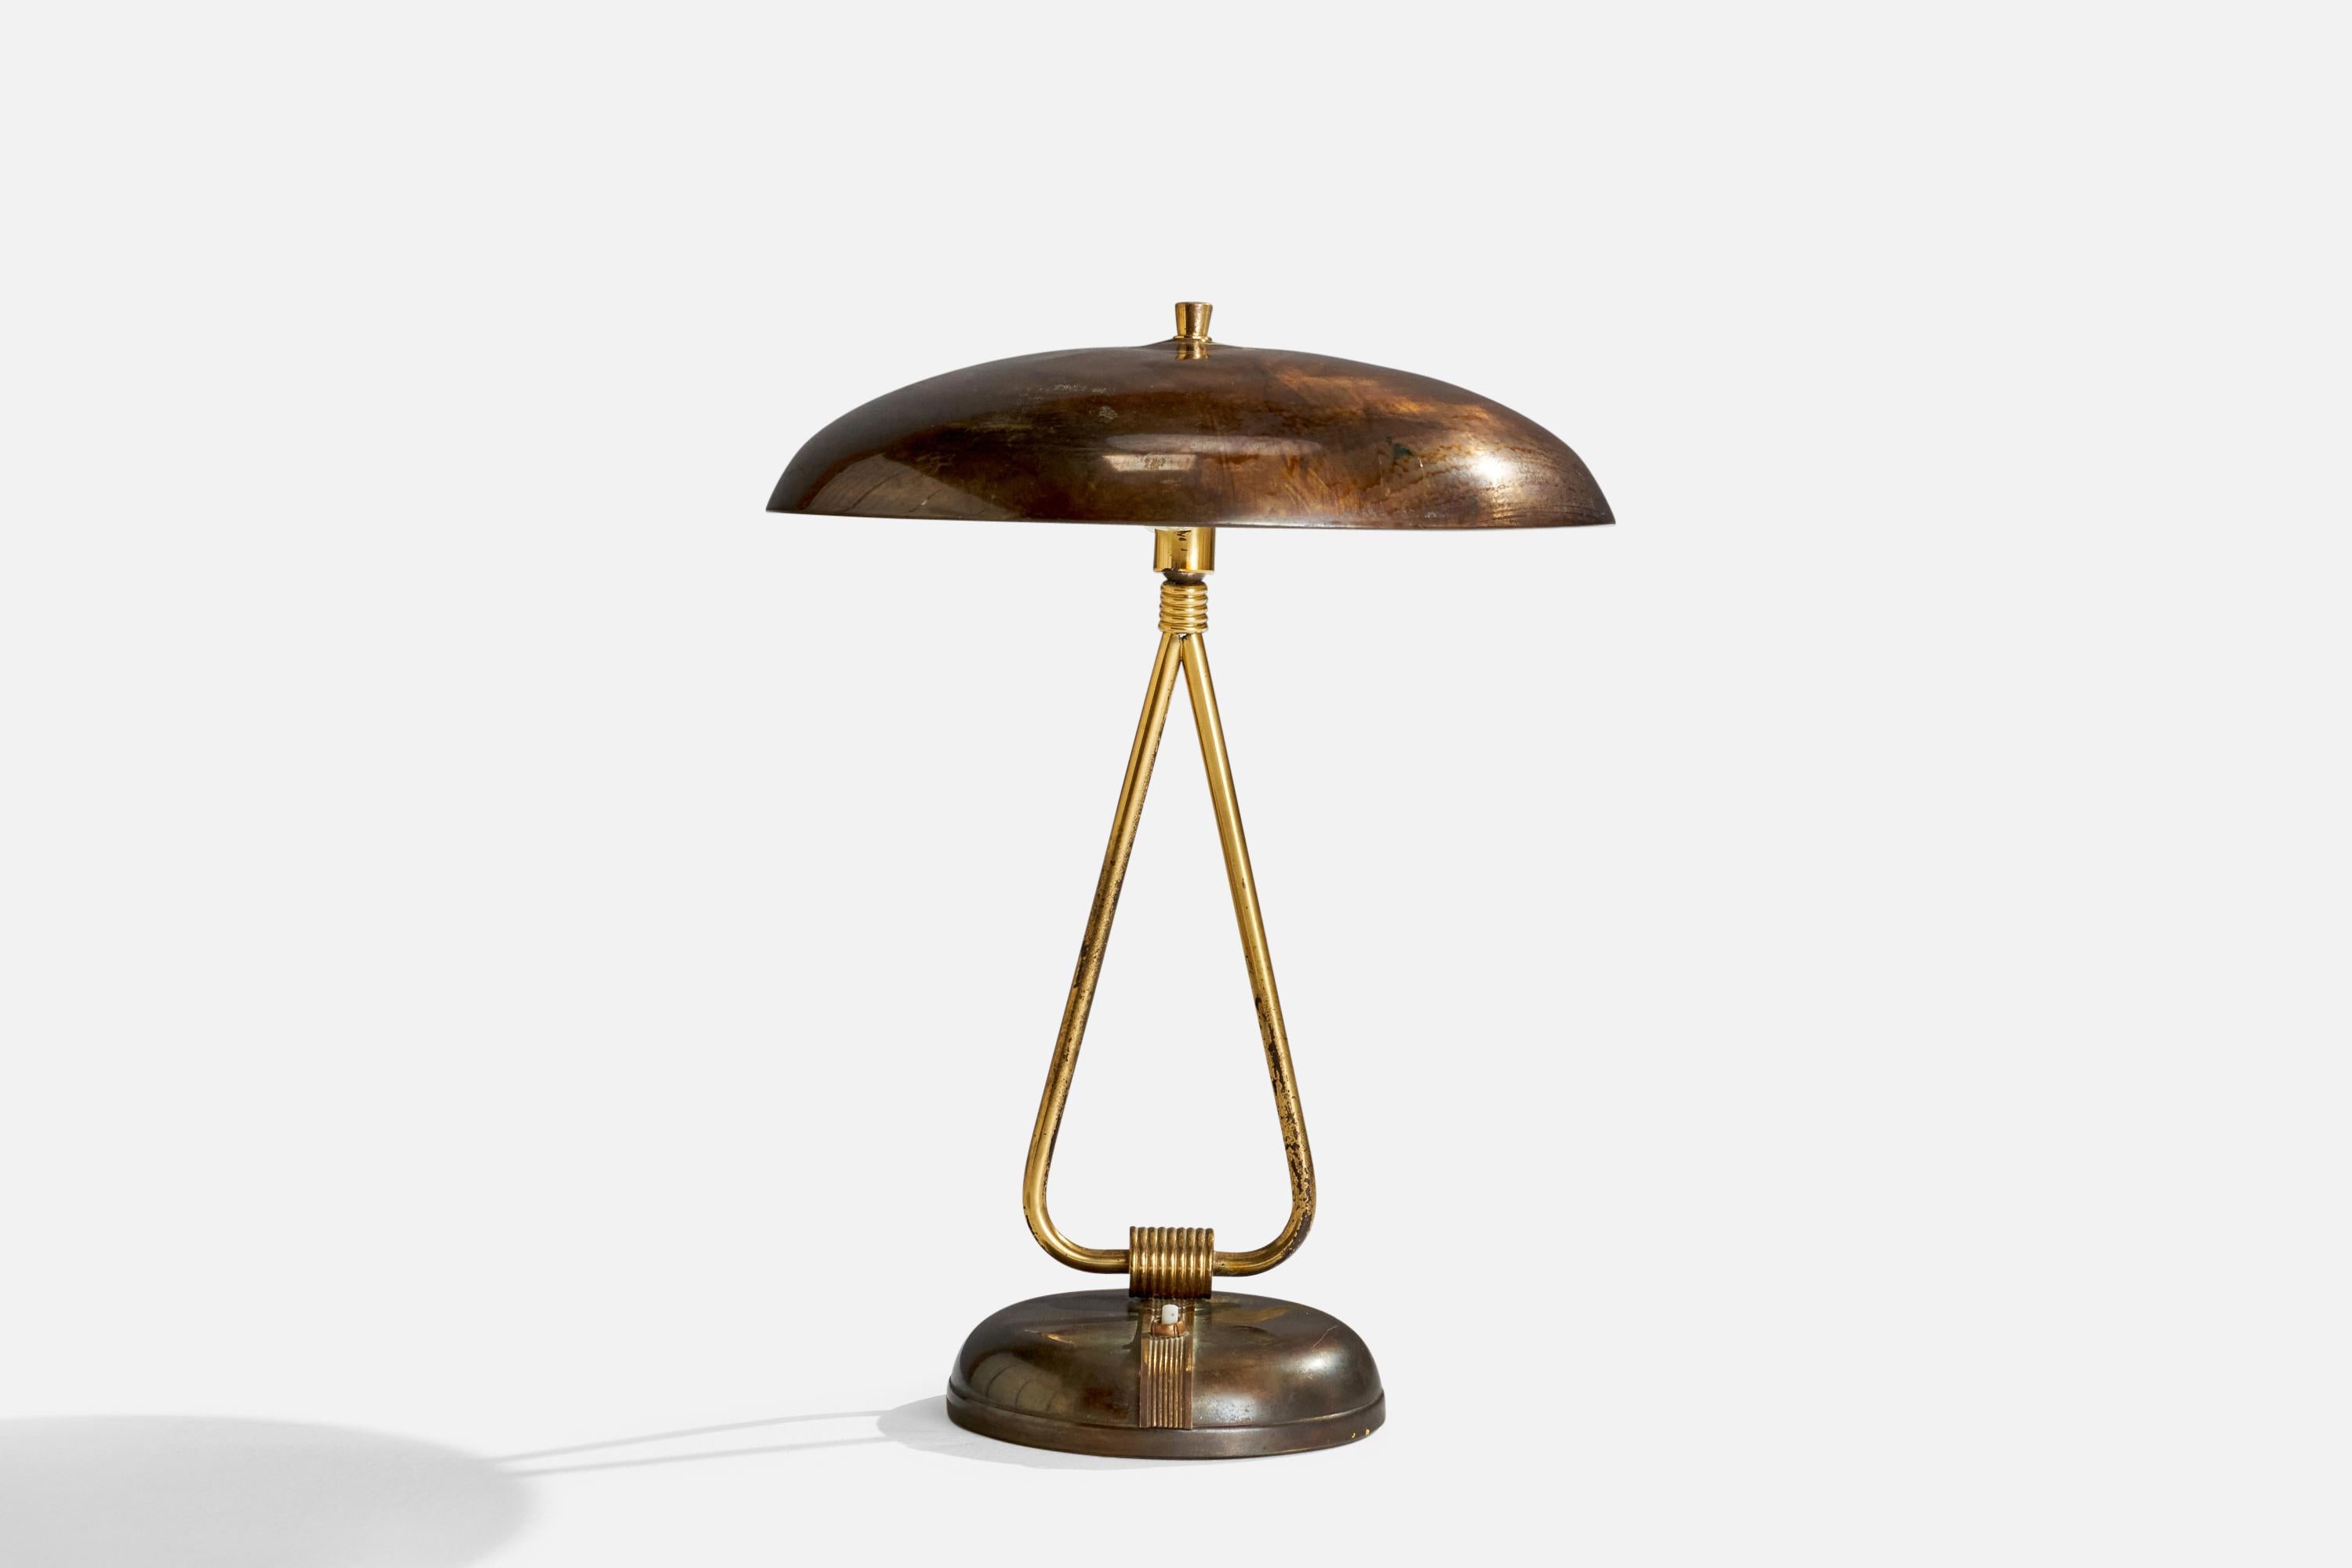 An adjustable brass table lamp designed and produced in Italy, 1940s.

Overall Dimensions (inches): 17” H x 12.5” Diameter
Bulb Specifications: E-14 Bulbs
Number of Sockets: 2
All lighting will be converted for US usage. We are unable to confirm